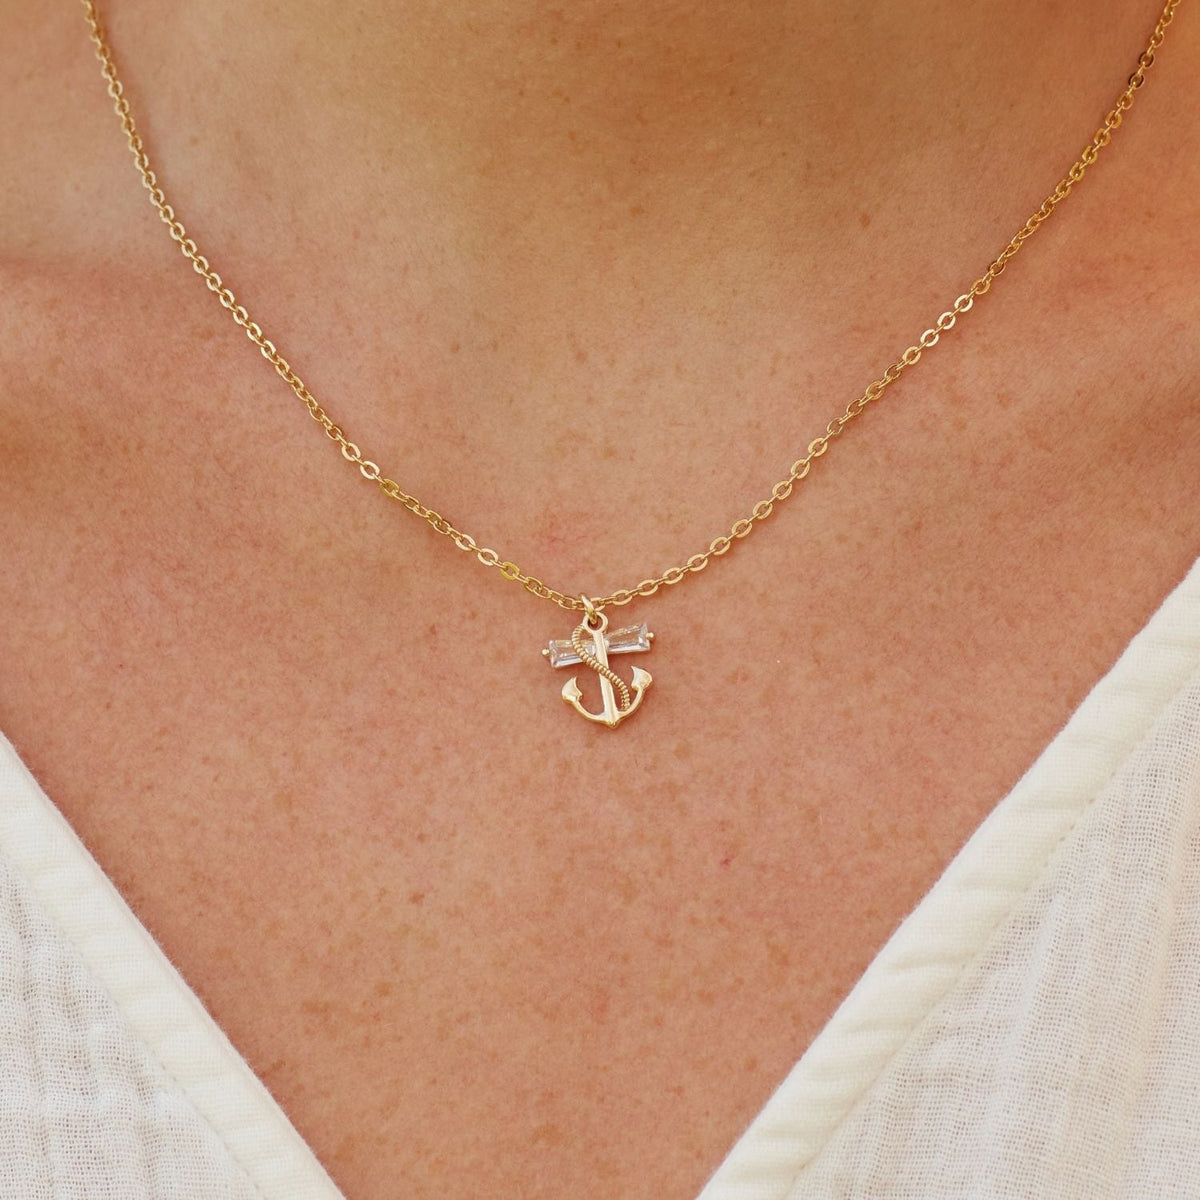 To the Best Mother in Law (From Daughter in Law) | Man of My Dreams | Anchor Necklace